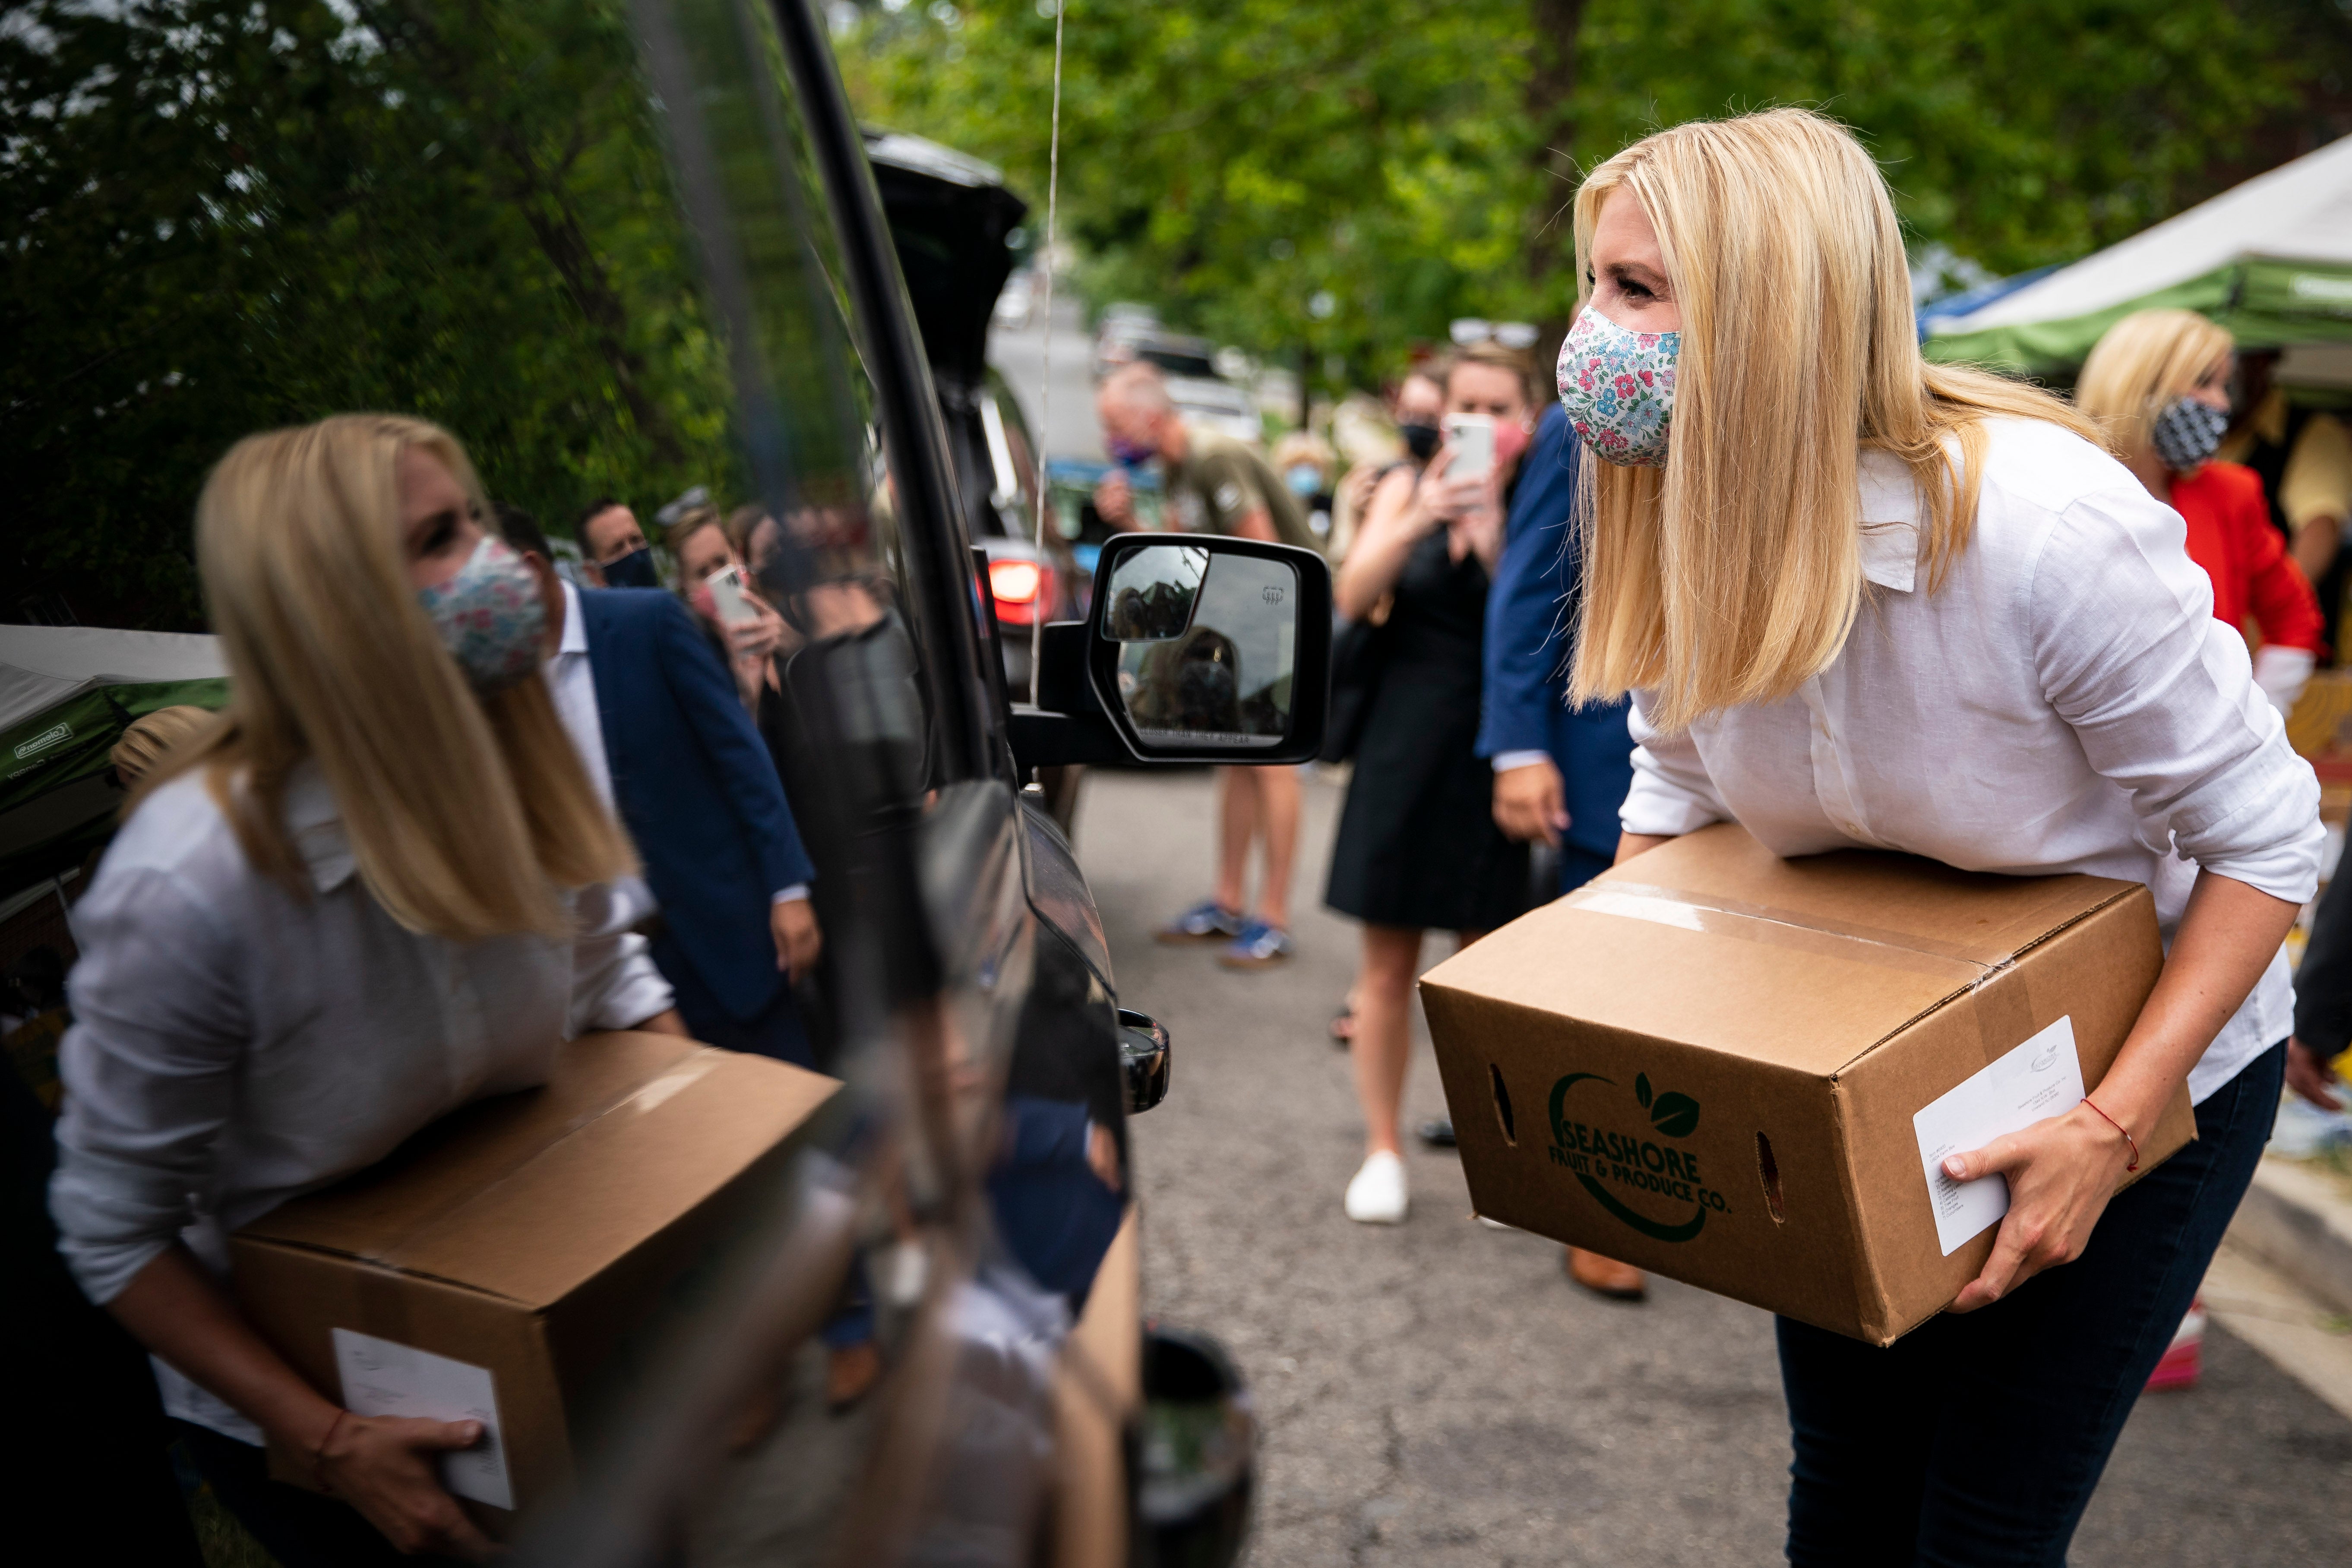 Ivanka Trump helps distribute food boxes as part of the Farmers to Families food box programme, at the DC Dream Center, on 20 July, 2020 in Washington, DC